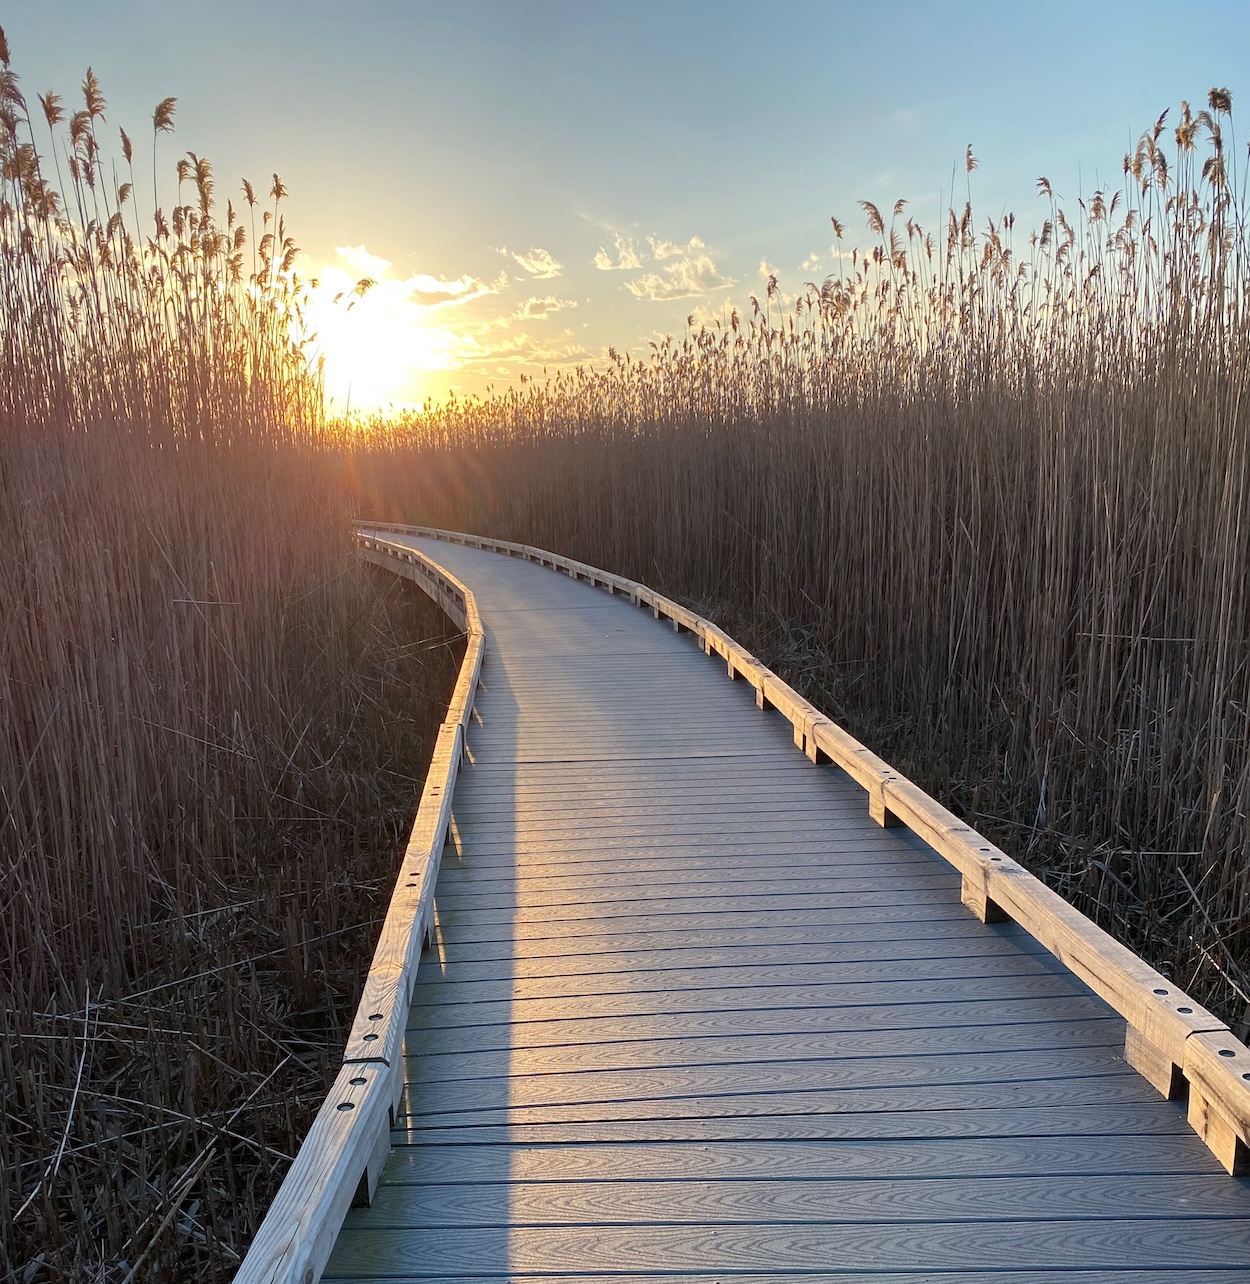 It's the weekend! Number 327, Sun Setting over a Walkway in the Reeds at Parker River Refuge in Newburyport, MA